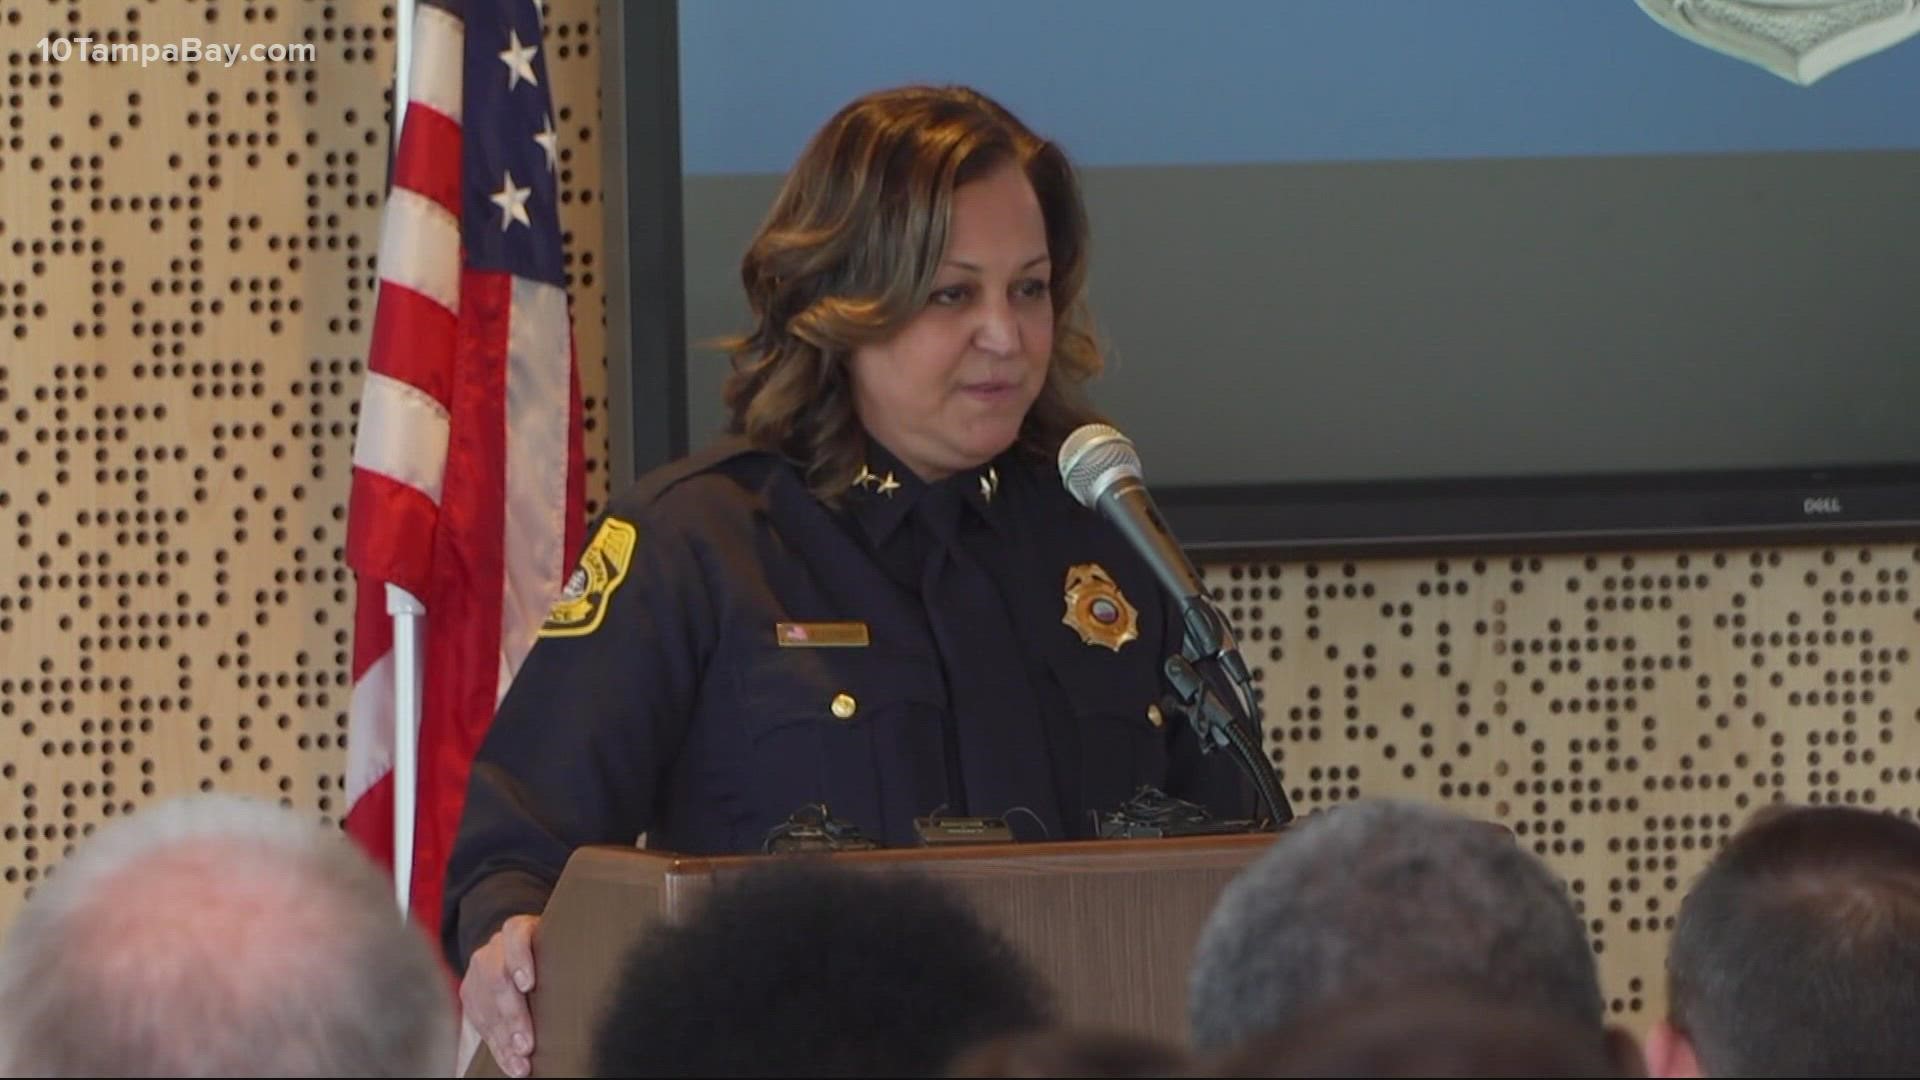 O'Connor spent the first 22 years of her career in law enforcement serving Tampa communities.